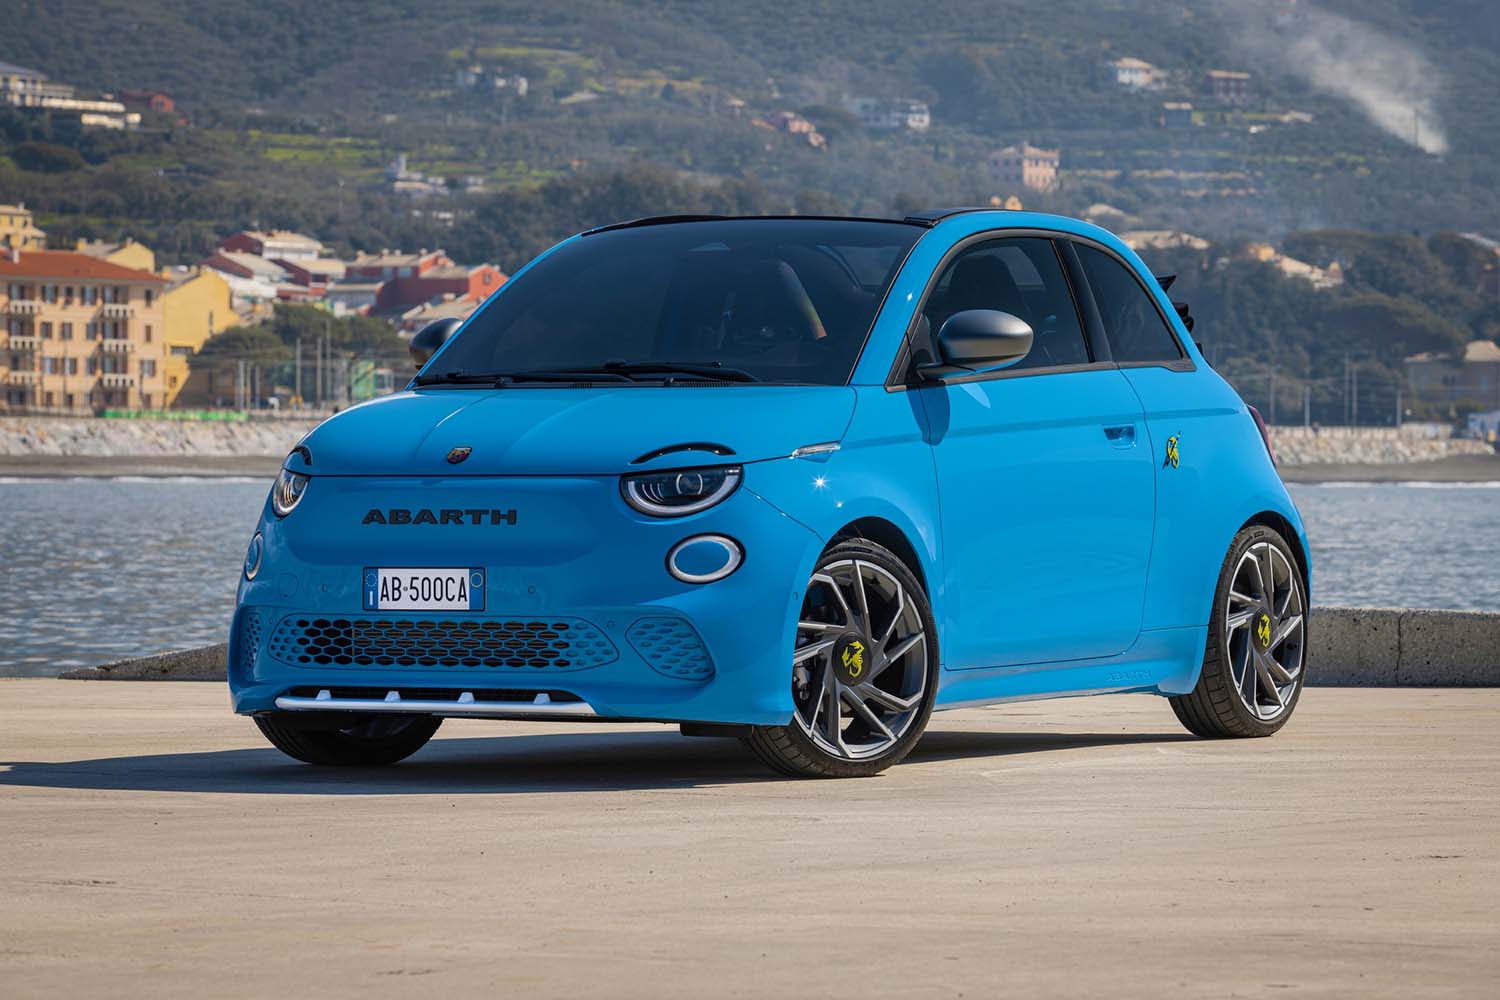 Fiat 500 in bright blue parked in front of a small body of water and a city on a hill